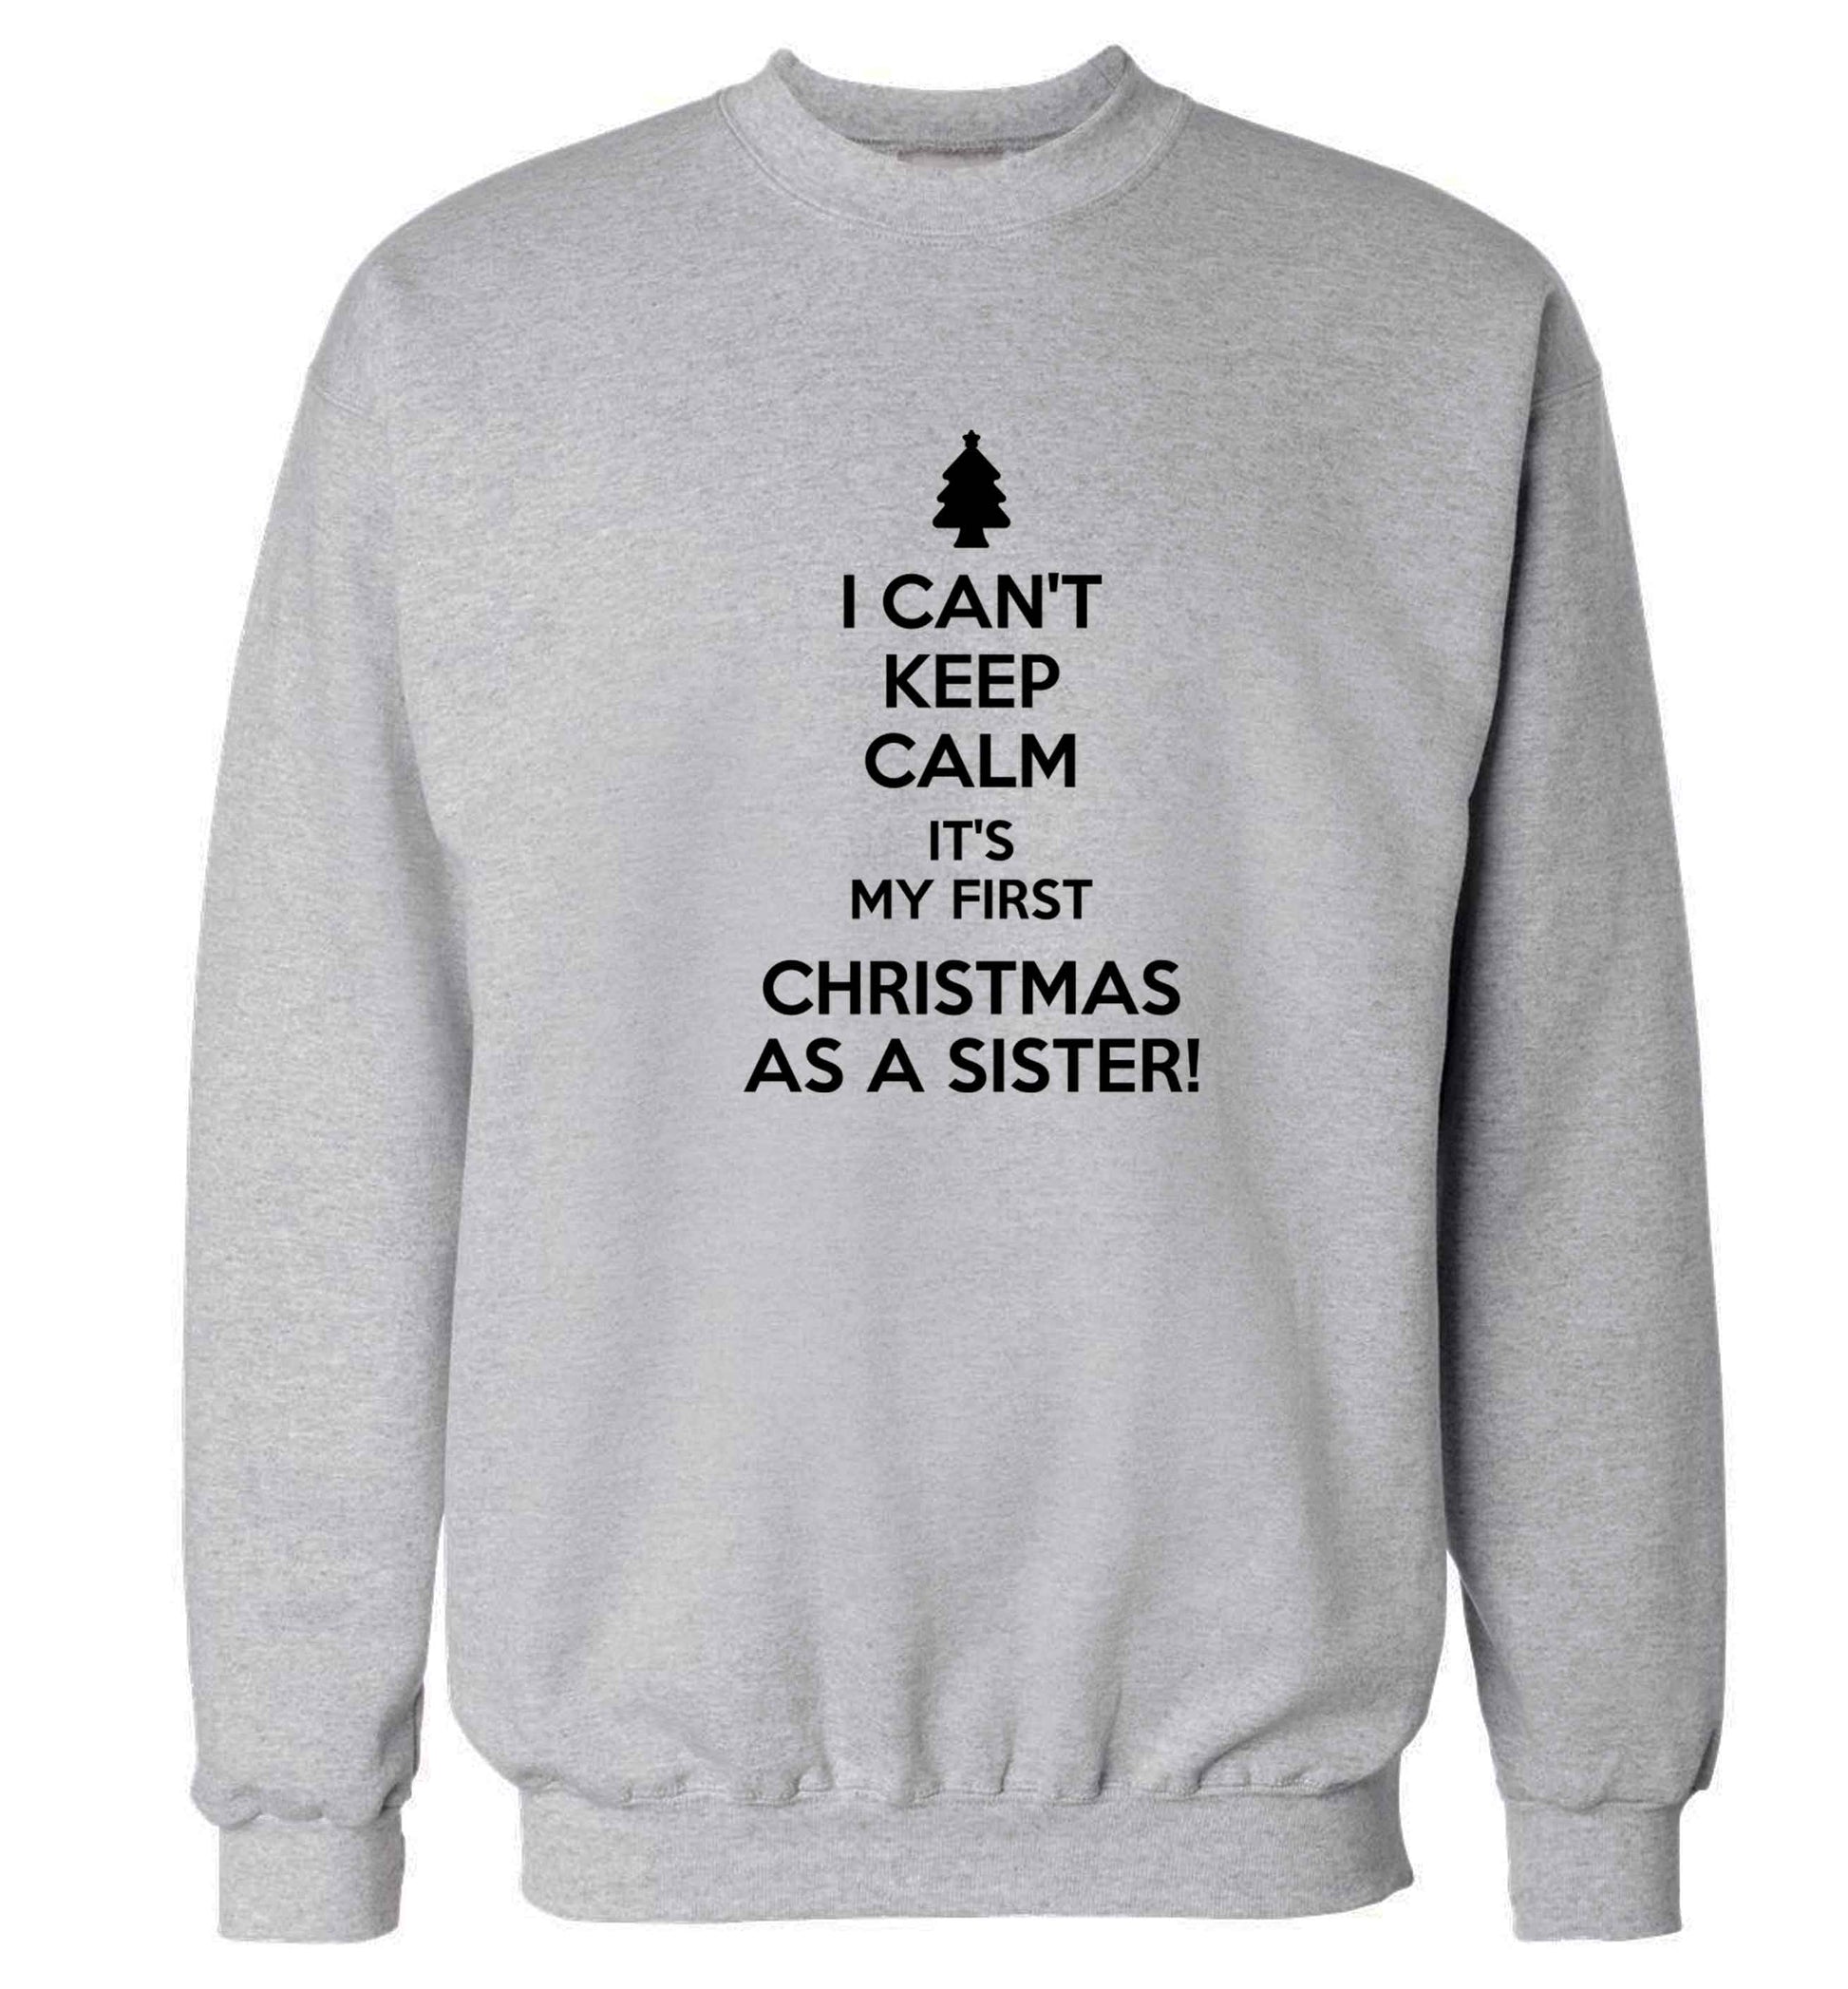 I can't keep calm it's my first Christmas as a sister! Adult's unisex grey Sweater 2XL